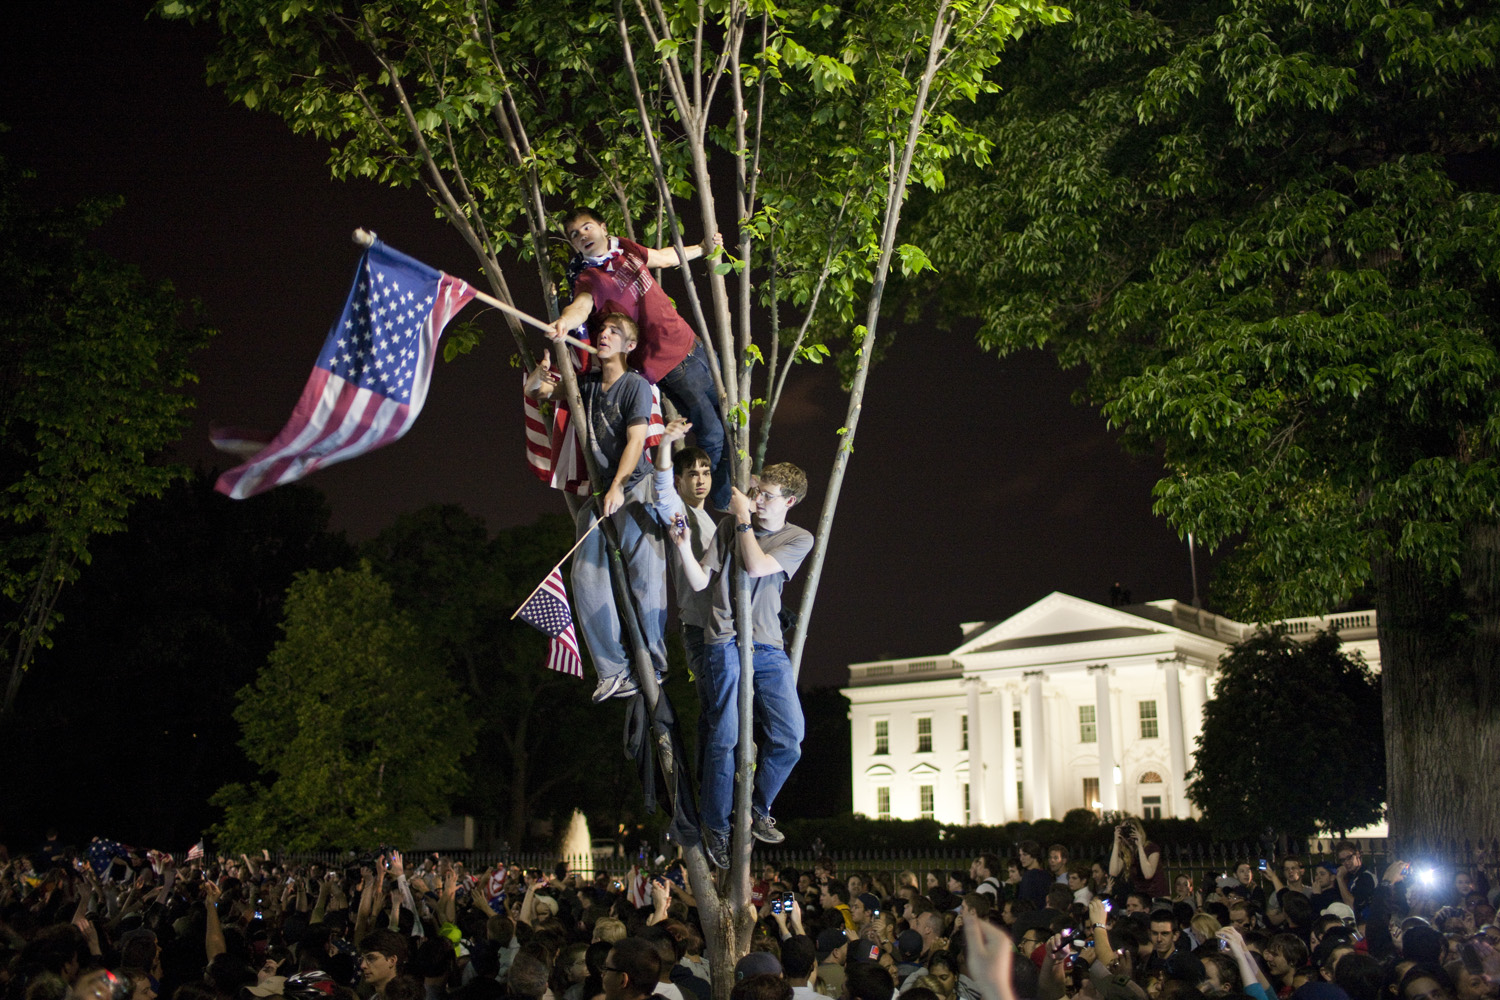 Brooks Kraft. From  Death Comes for the Terrorist.  May 20, 2011 issue.Crowds celebrate on Pennsylvania Avenue in front of the White House in Washington, after President Barack Obama announced that Al-Qaeda's leader Osama bin Laden had been killed.